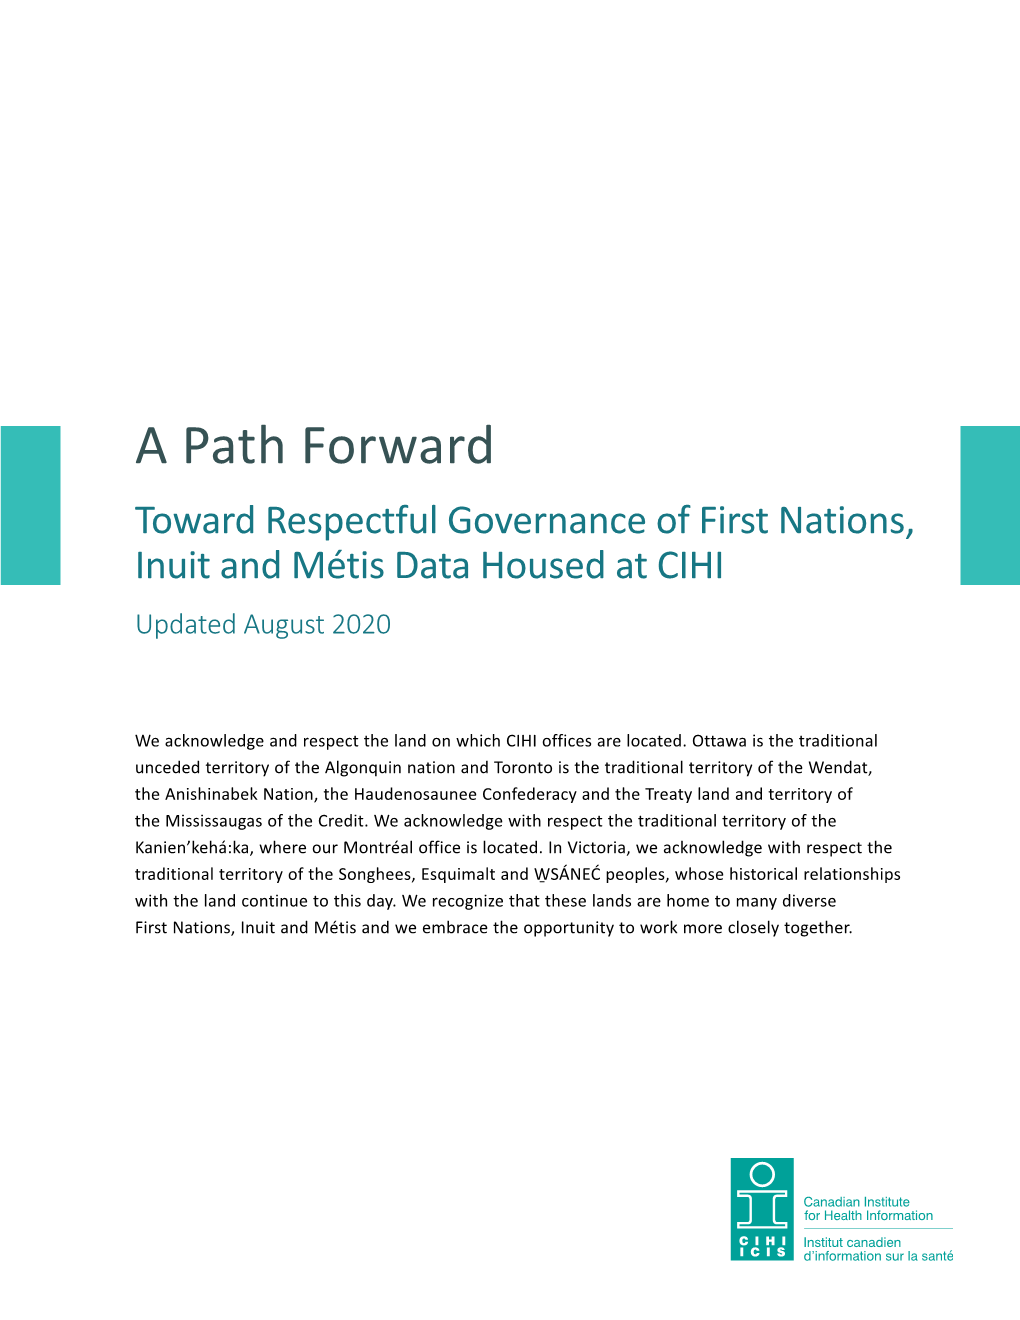 A Path Forward: Toward Respectful Governance of First Nations, Inuit and Métis Data Housed at CIHI, Updated August 2020